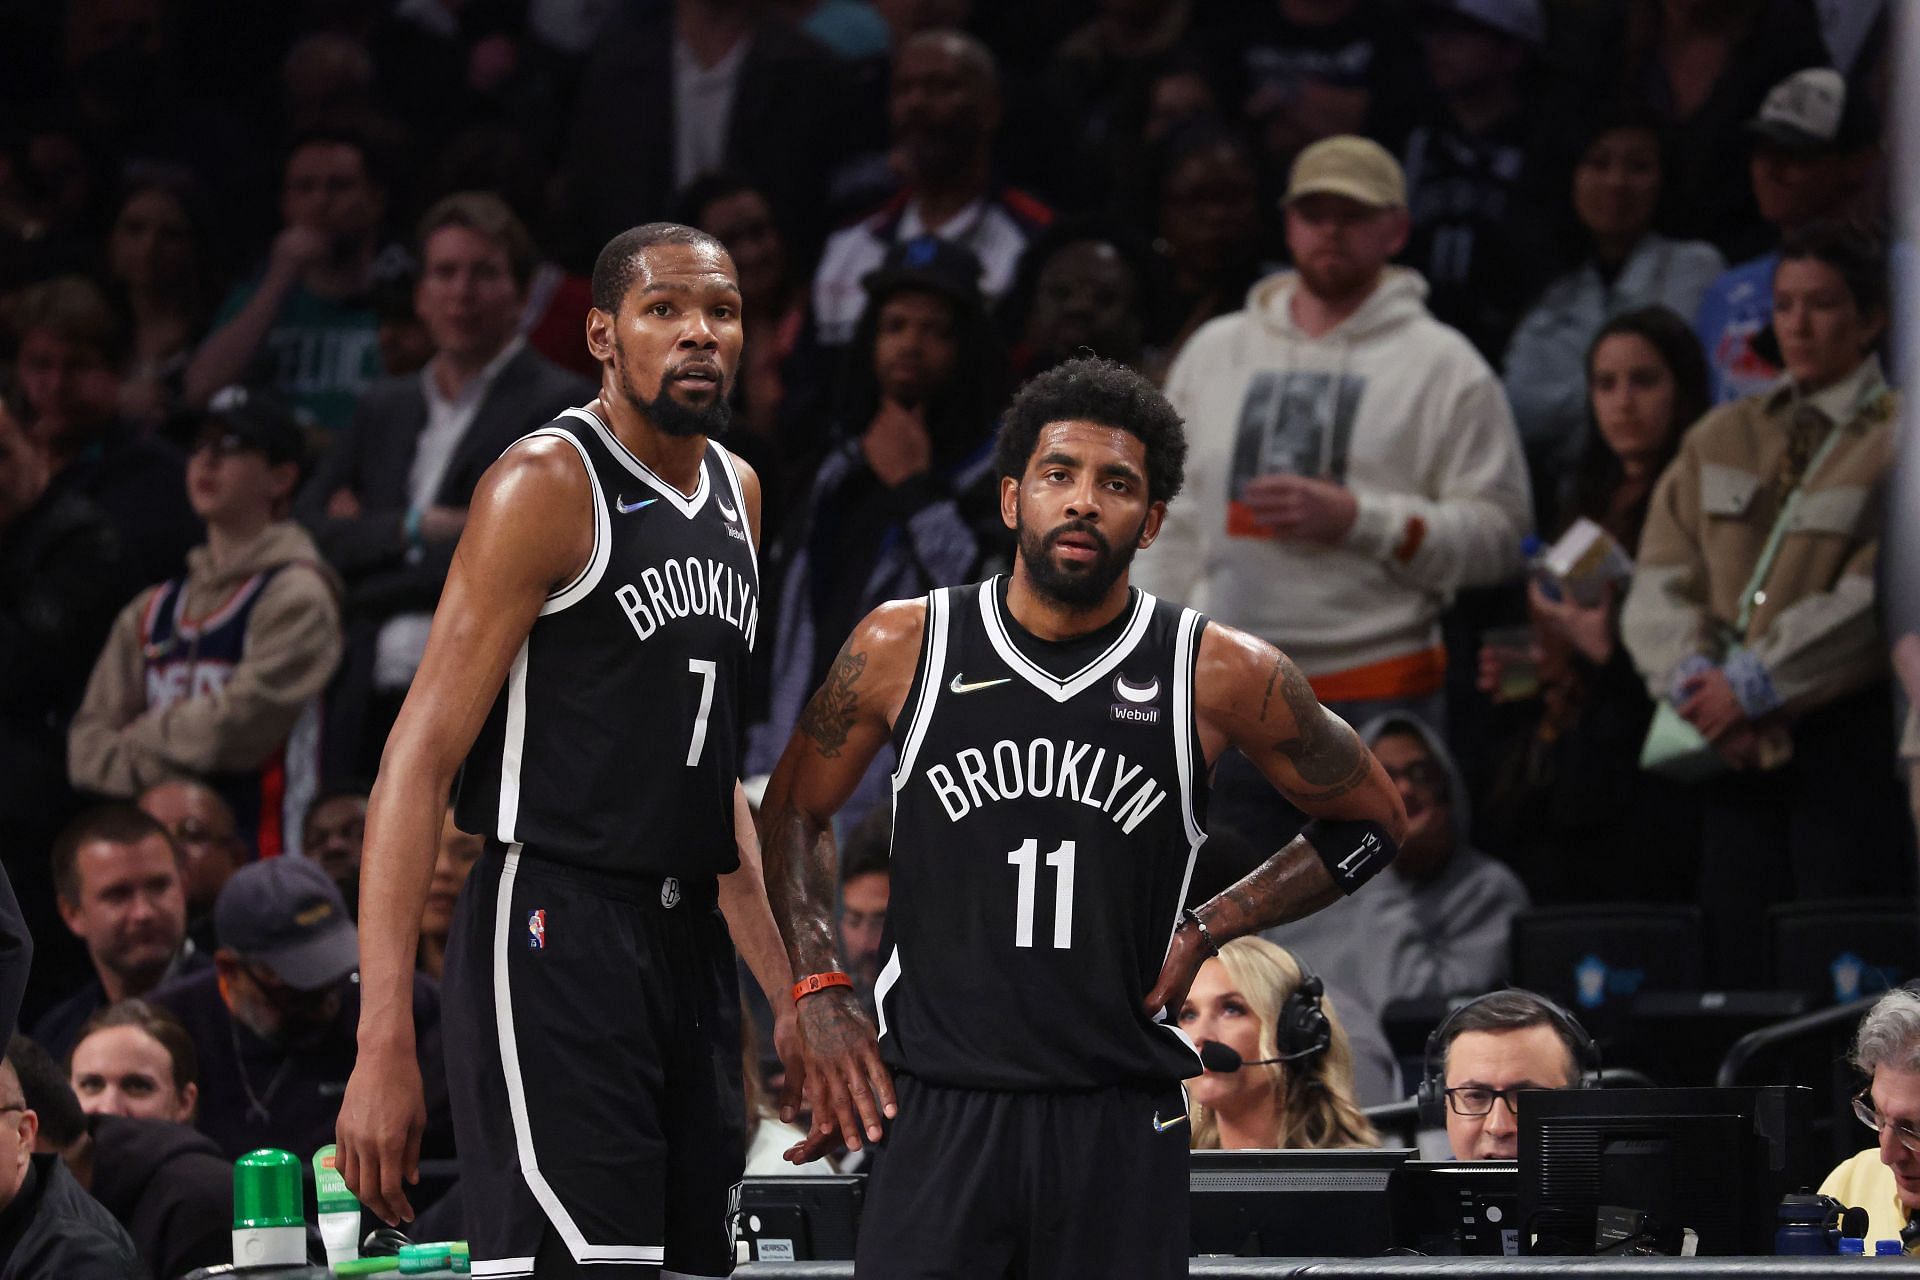 Boston Celtics v Brooklyn Nets - Game Three; Kyrie Irving and Kevin Durant react in disappointment